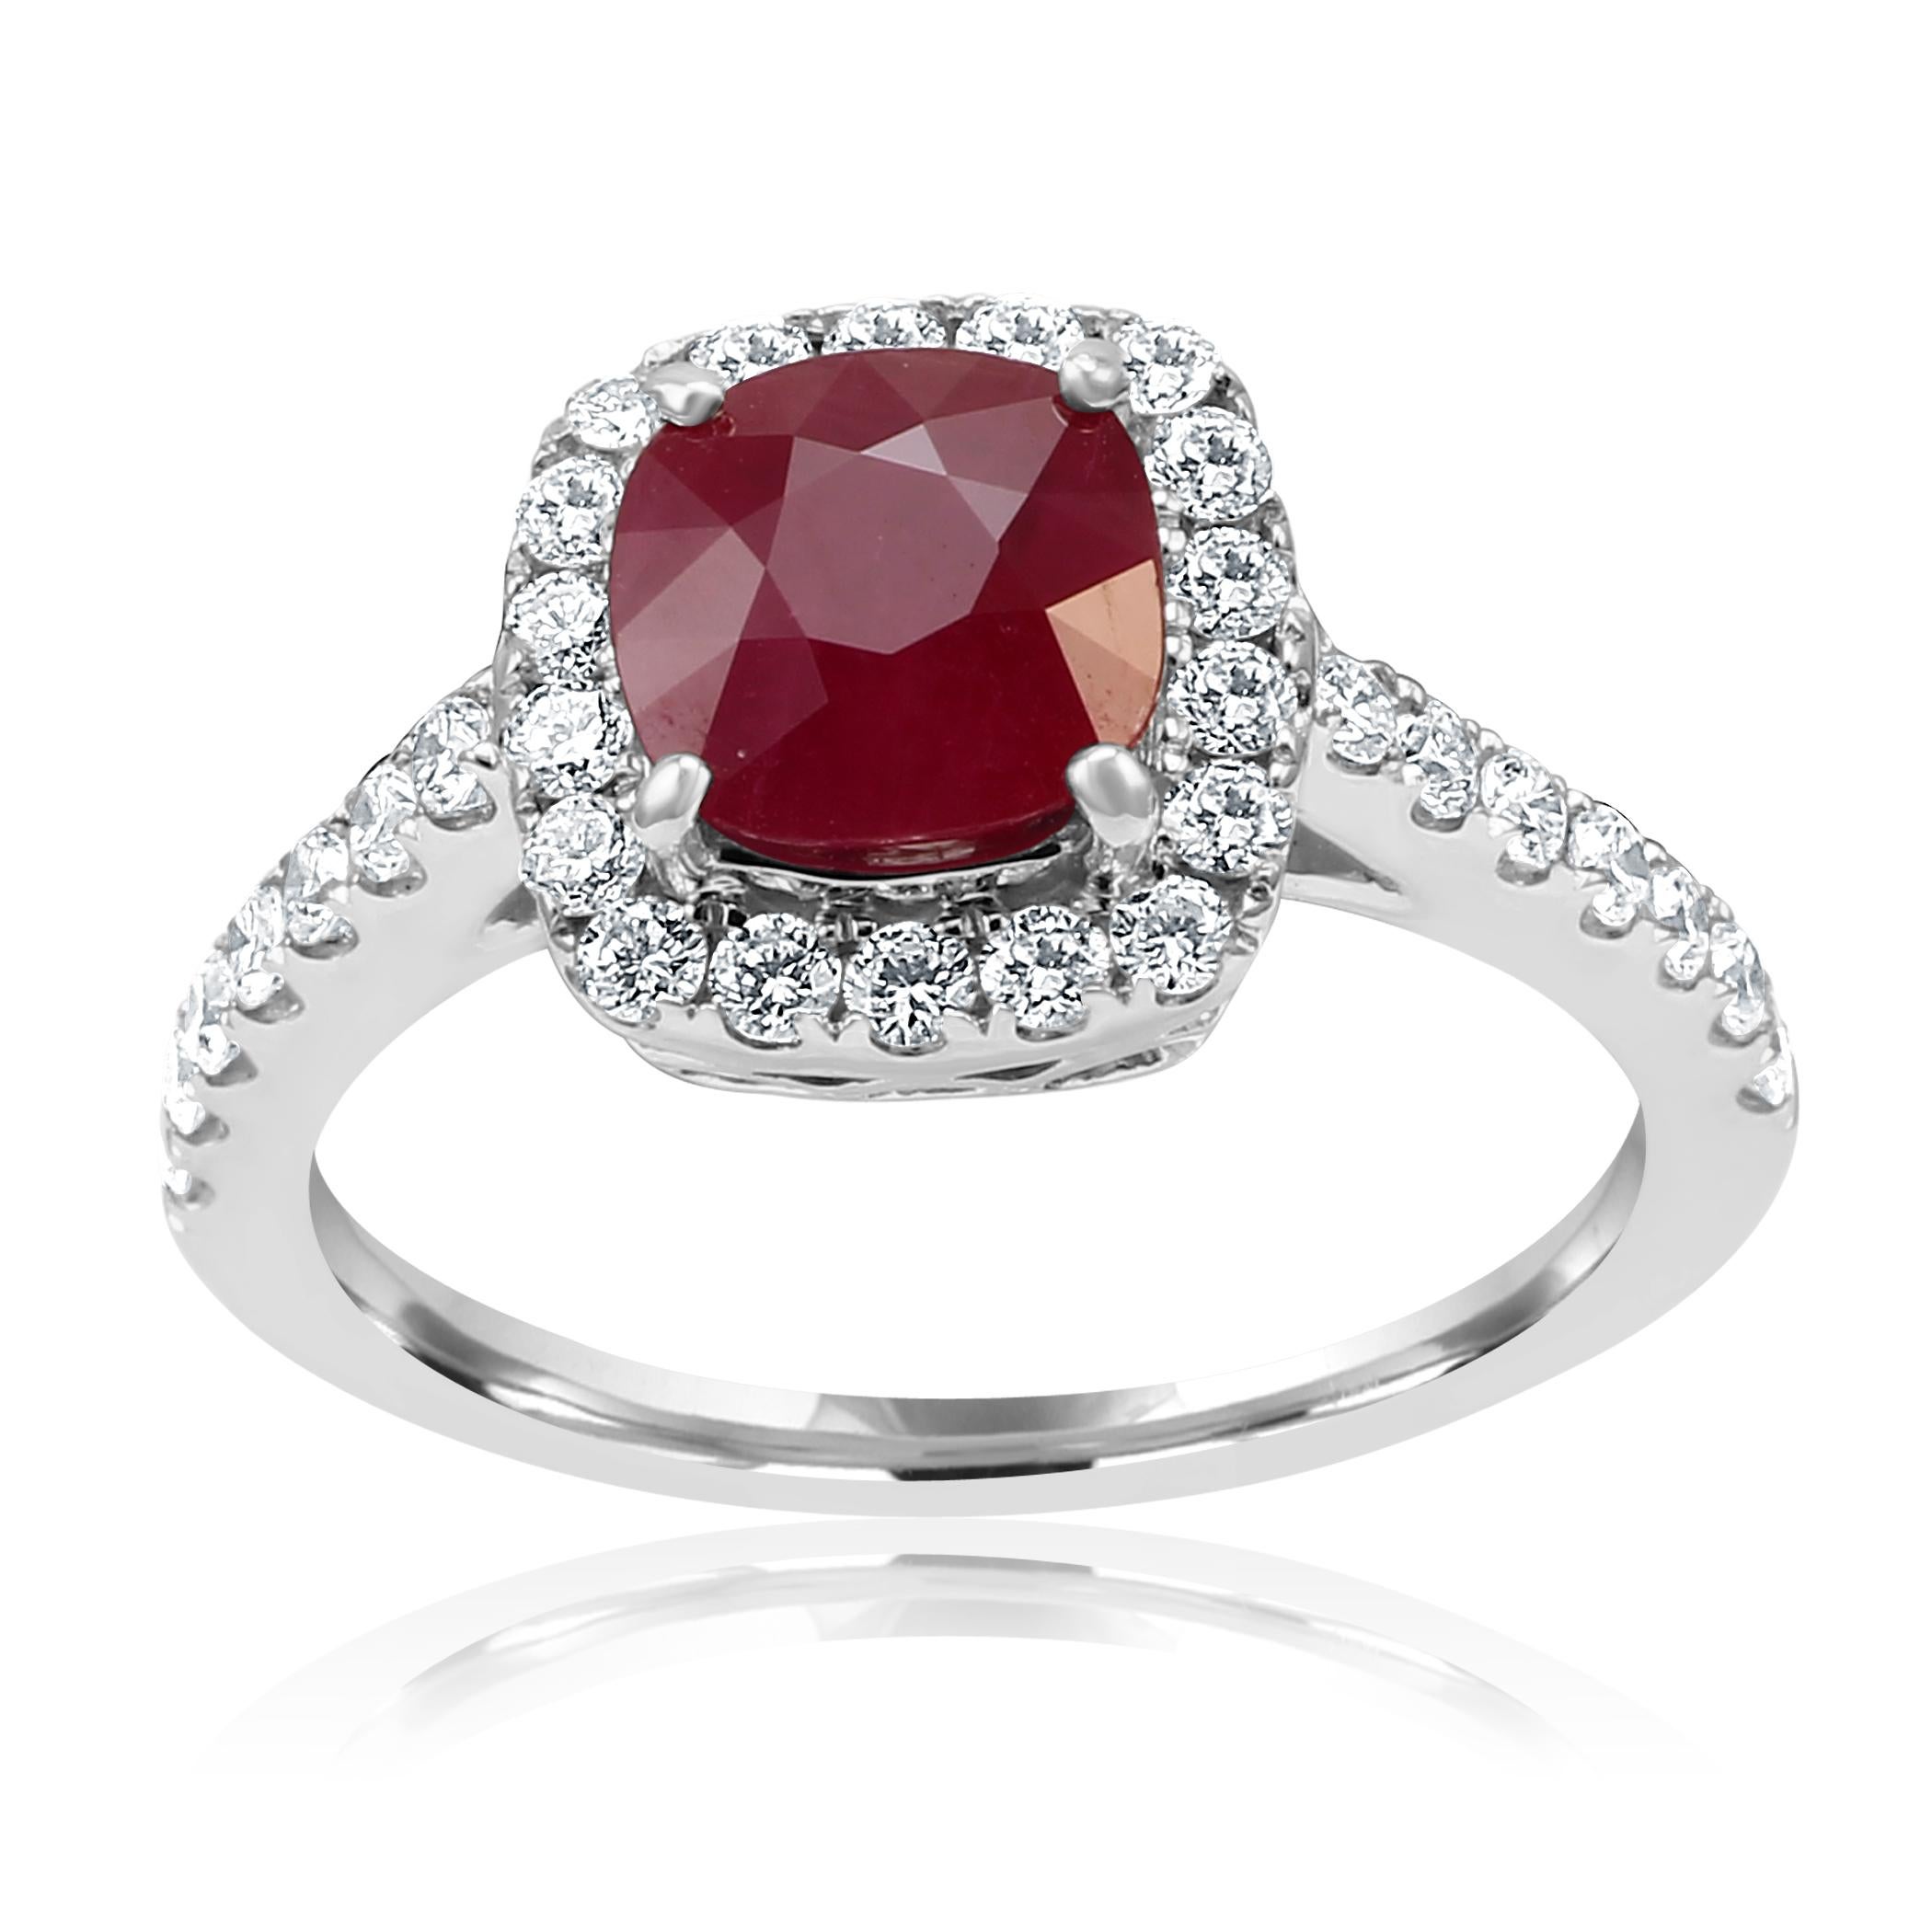 Gorgeous Ruby Cushion 1.66 Carat Encircled in Single Halo of White G-H Color VS-SI Clarity Round Diamonds 0.65 Carat in stunning 14K White Gold Engagement Bridal Fashion Ring. Total Weight 2.31 Carat.

MADE IN USA
Center Ruby Cushion 1.66